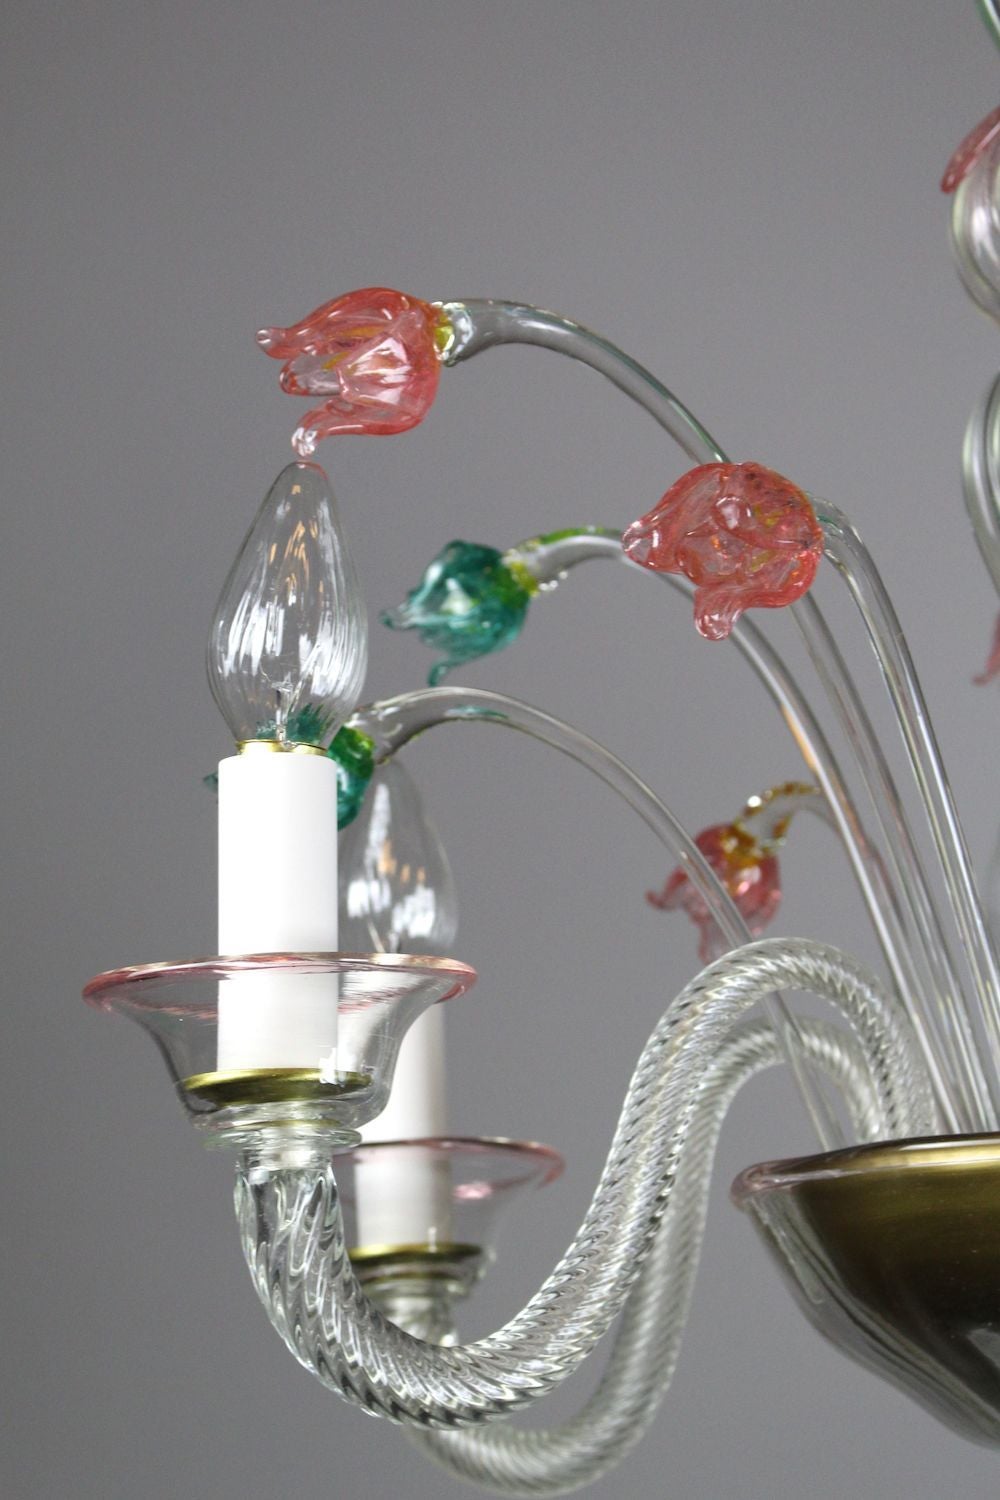 Circa 1955 Rare Murano Ca'rezzonico chandelier in transparent and multi-colour glass. This piece is an absolute collector's dream. Fully restored to its original condition, rewired, and ready to hang. The upper bouquet of the chandelier is composed